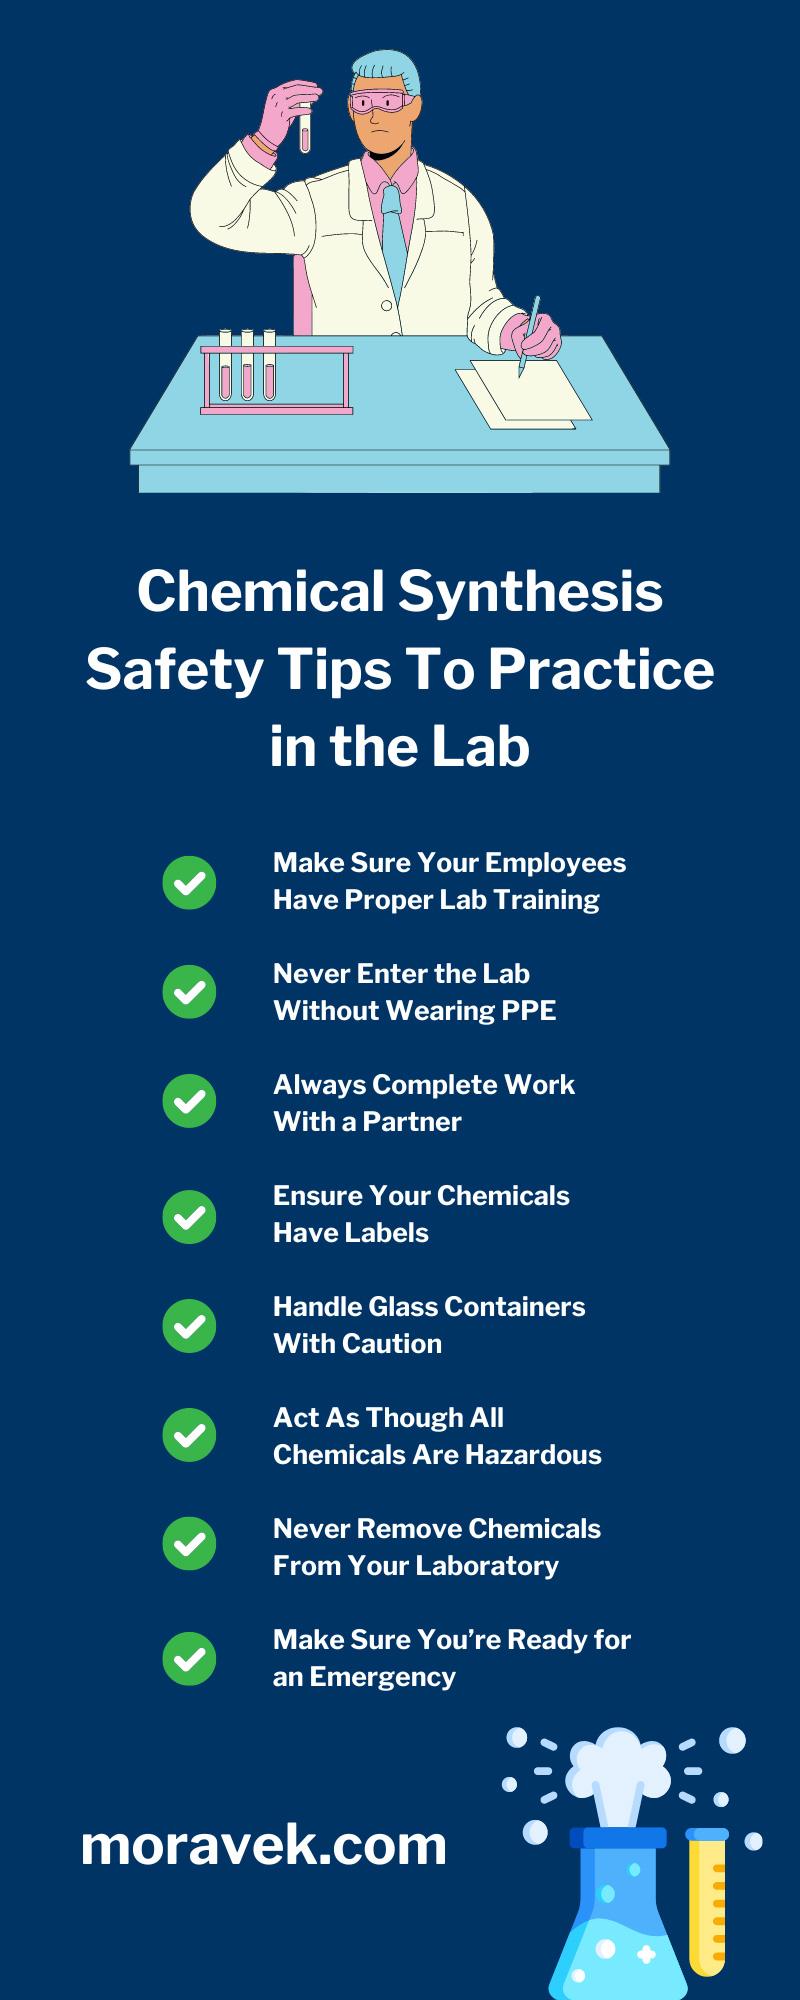 Chemical Synthesis Safety Tips To Practice in the Lab